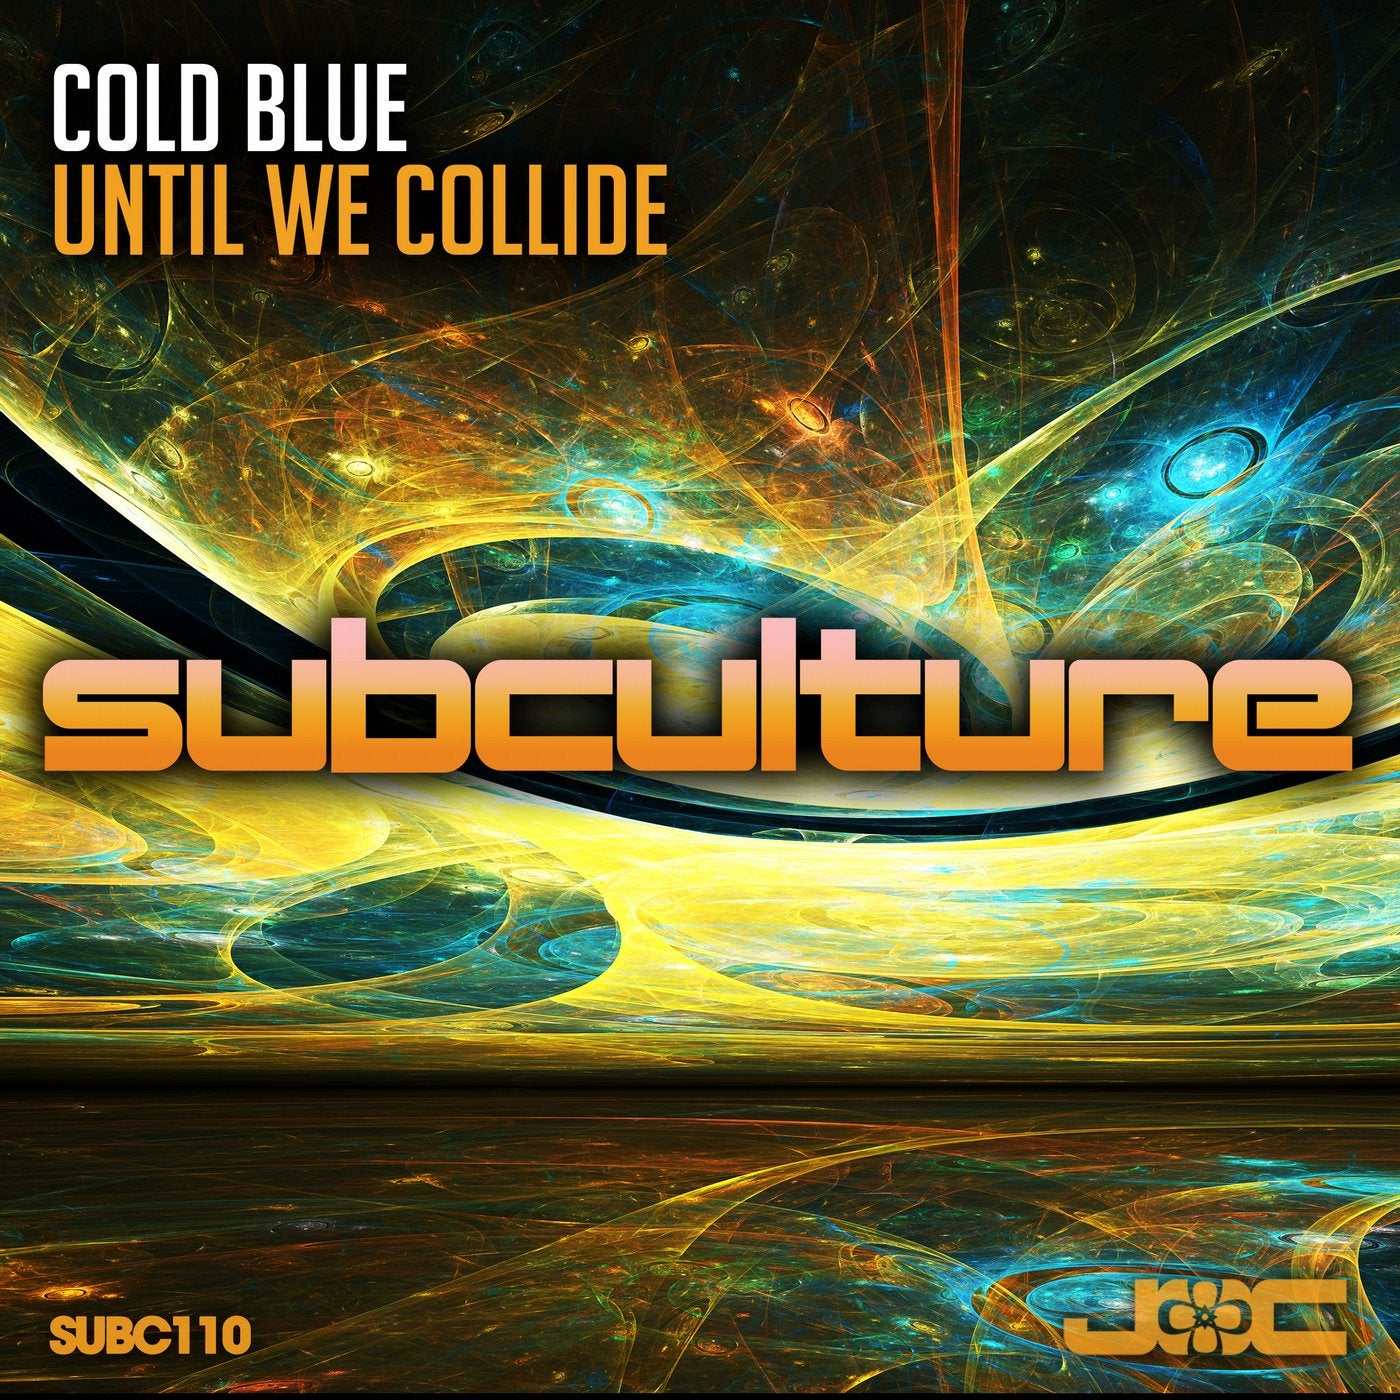 Музыка cold. Collide. Cold Blue. Collide музыка. Cold Blue - Black Rock.